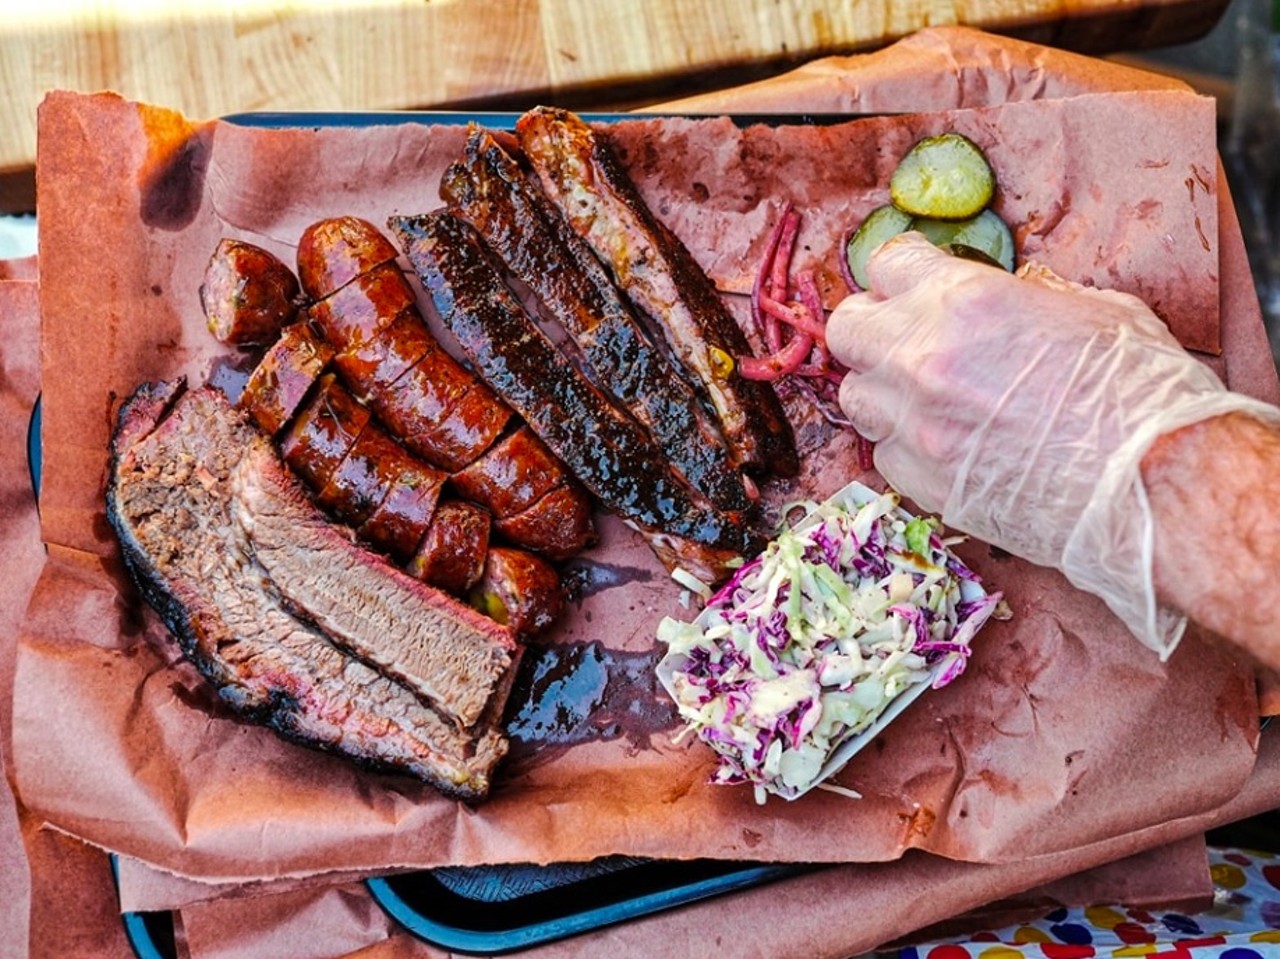 Smokemade Meats and Eats
1400 S. Crystal Lake Drive, Orlando
The stellar pop-up run by Tyler Brunache brings Central Texas-style barbecue to the old Italian House Restaurant space. His brisket might be one of the best in the city, but other items like cheddar-jalapeño sausage, ribs, smoked turkey and bangin’ sides and desserts will set barbecue fiends afire.